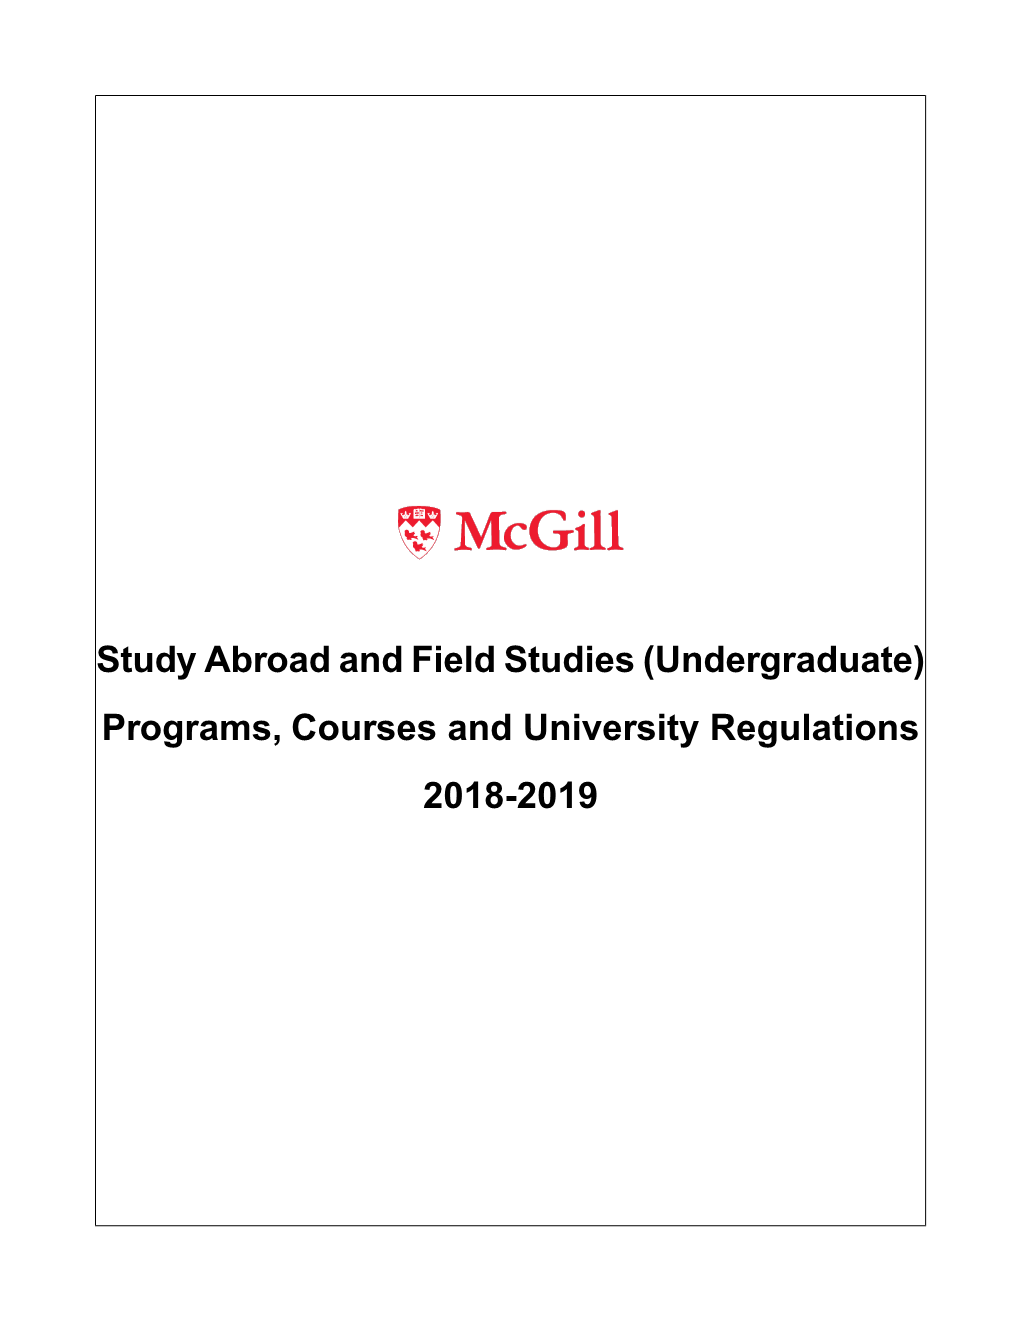 Study Abroad and Field Studies (Undergraduate) Programs, Courses and University Regulations 2018-2019